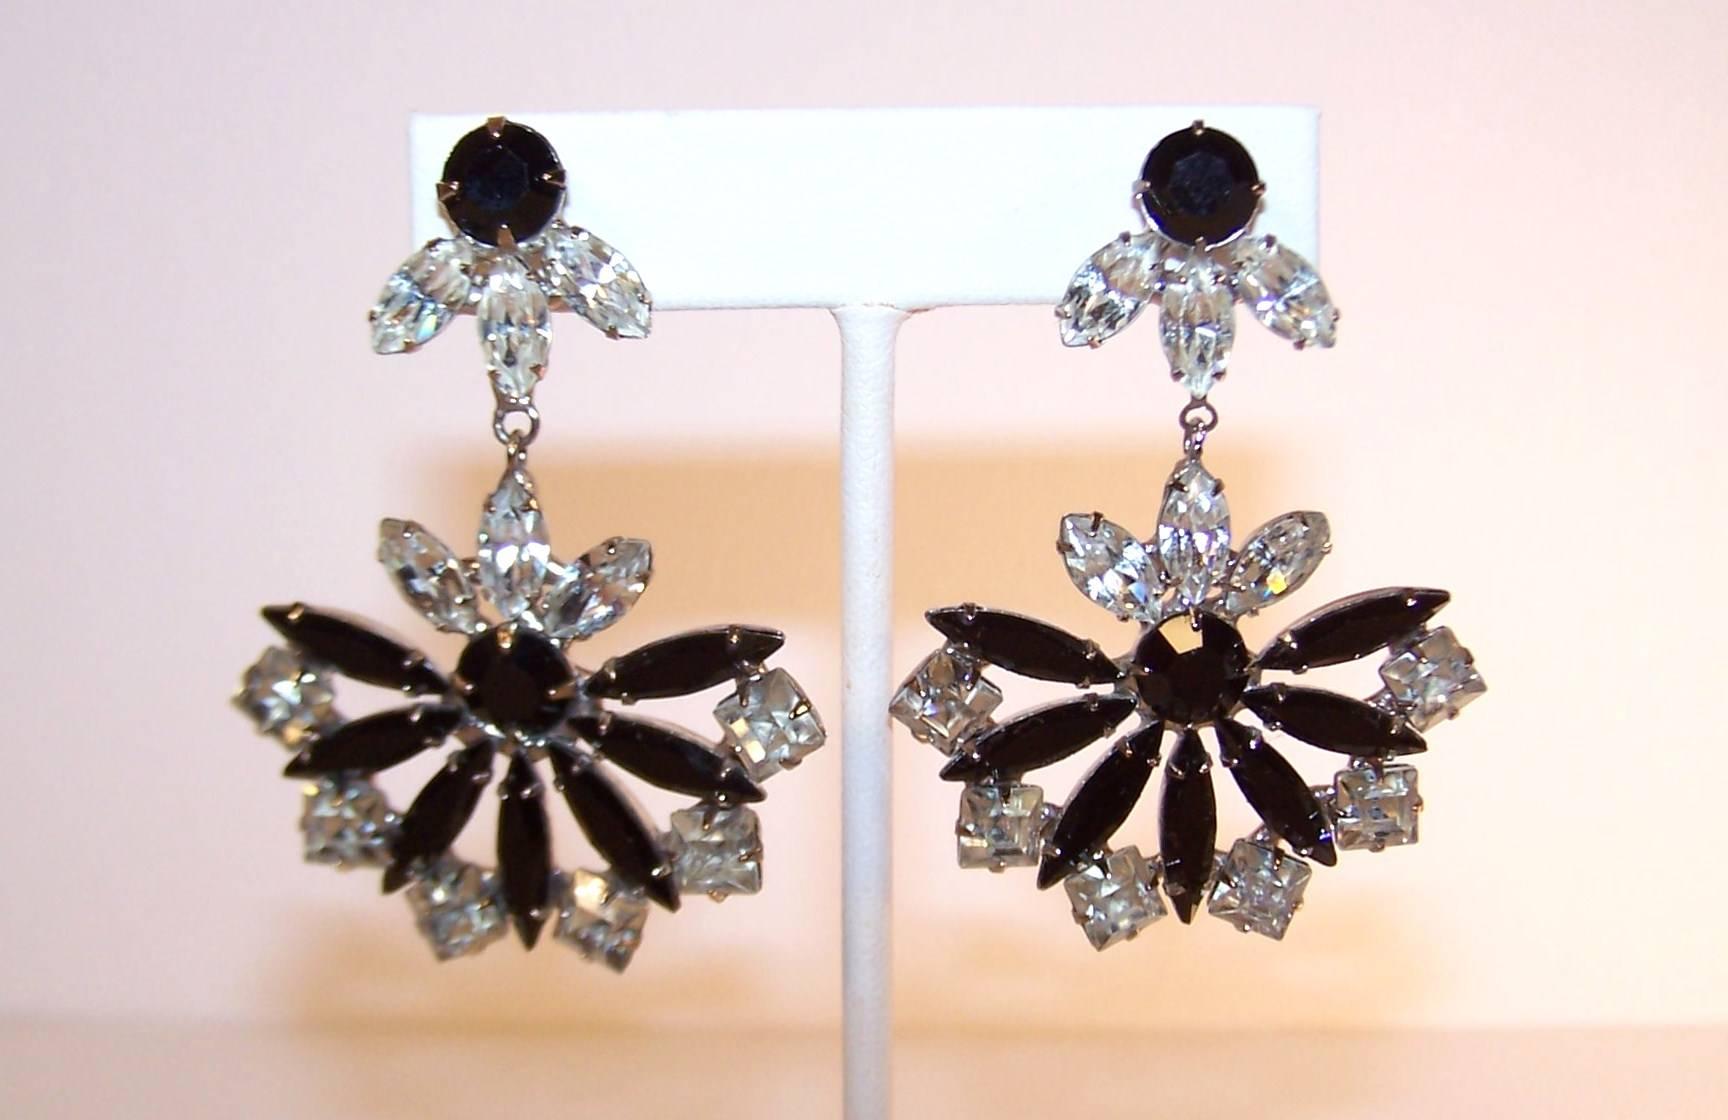 These Art Deco inspired earrings offer a great combination of two tone coloring and an eye catching fan shape.  The faceted black and crystal rhinestones are mounted in a silver metal setting with a comfortable clip on back.  The inverted fan shaped